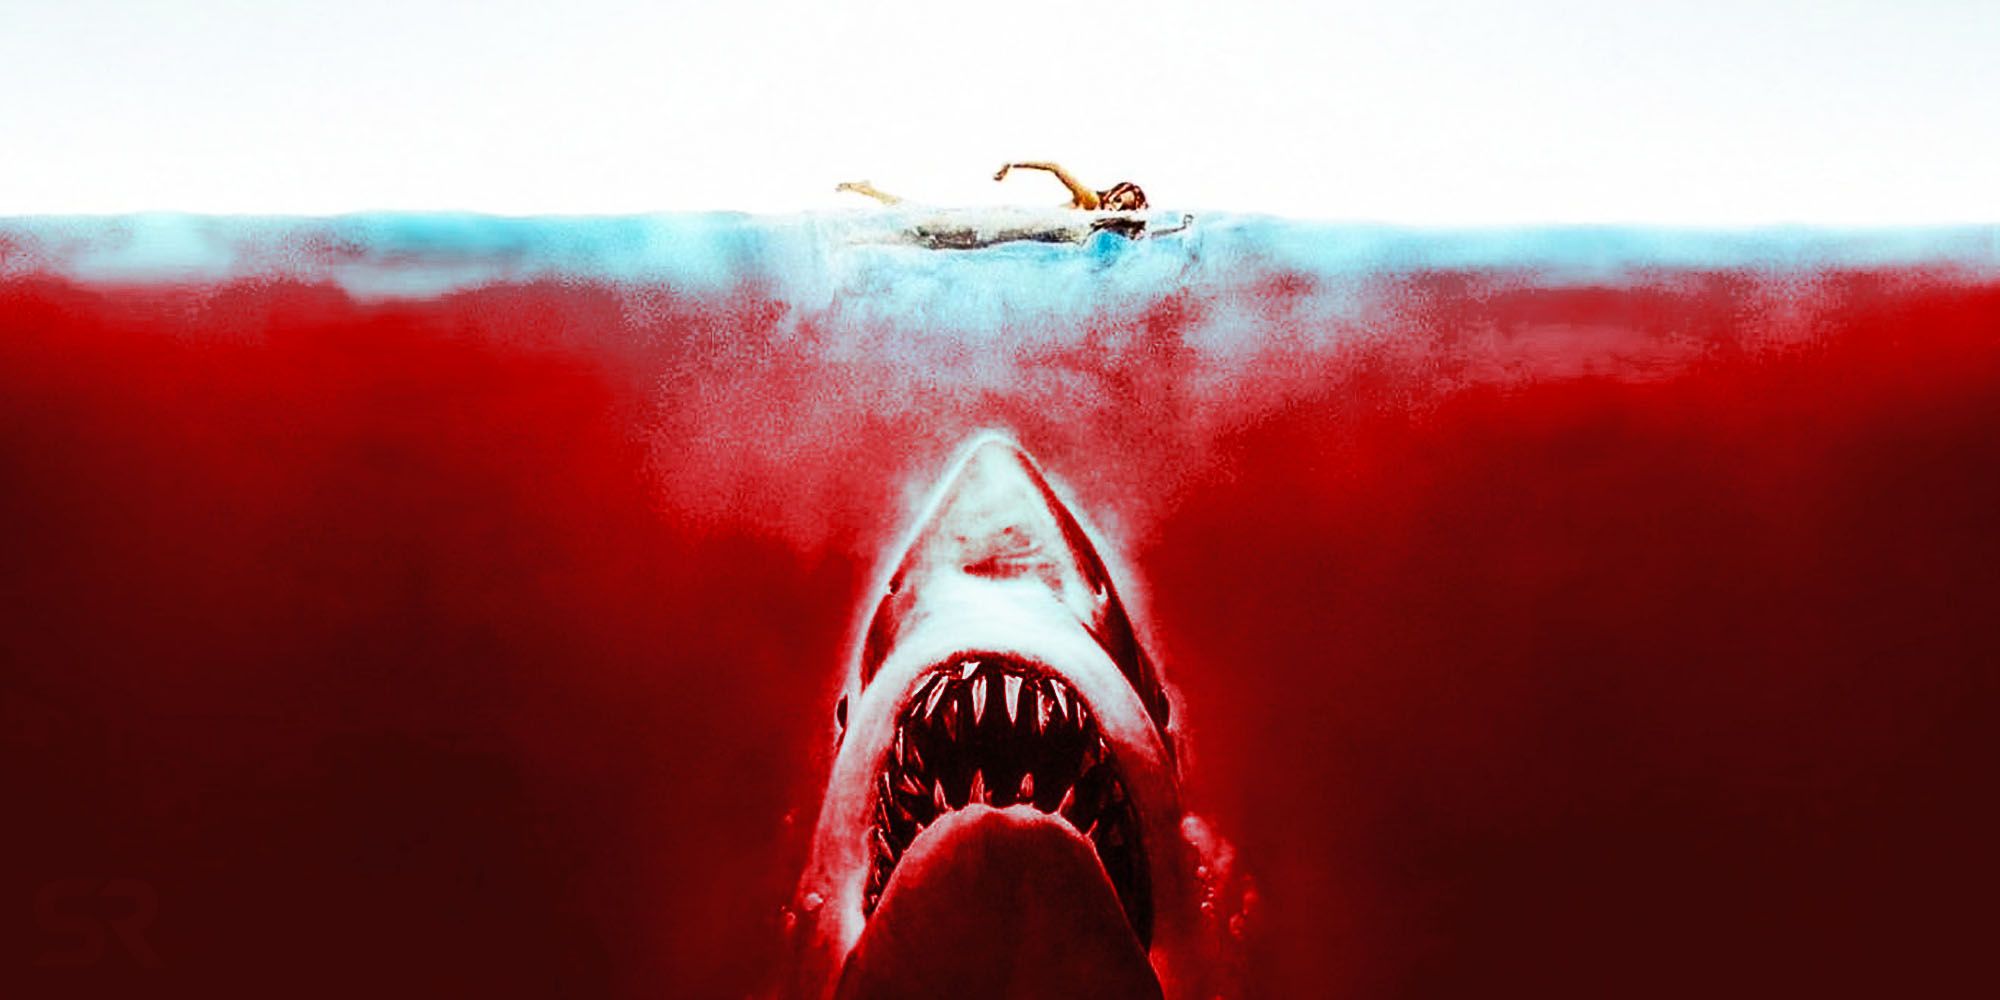 Is Steven Spielberg's Jaws A Horror Movie Or Not?